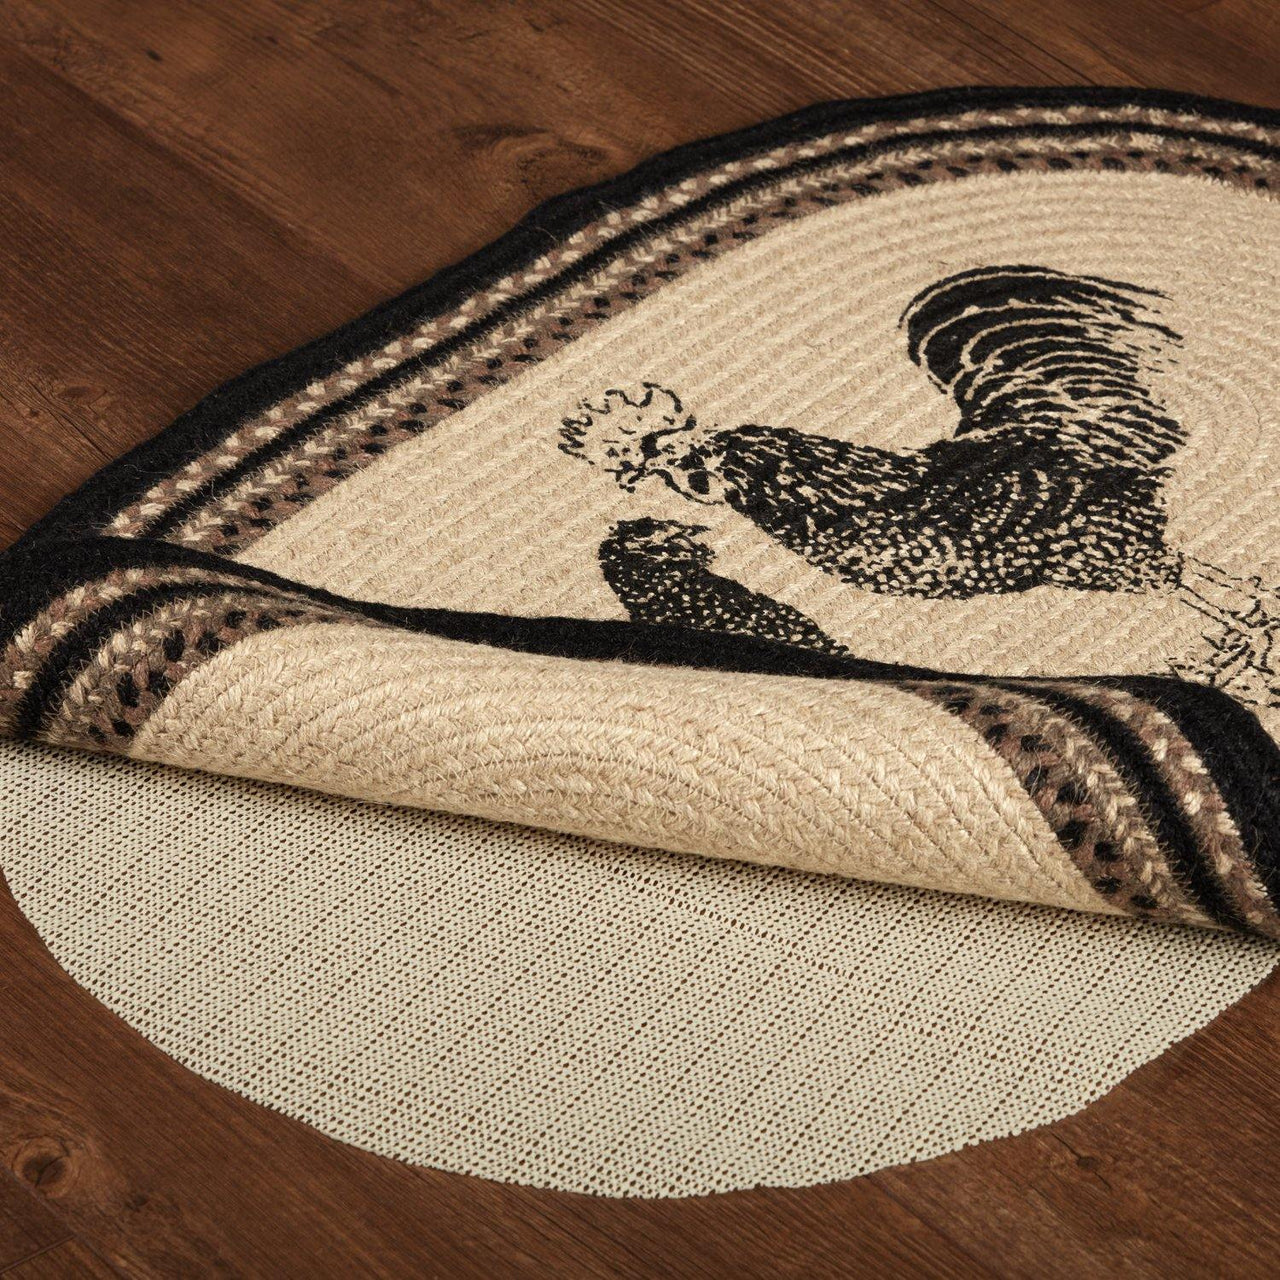 Sawyer Mill Charcoal Poultry Jute Braided Rug Oval 20"x30" with Rug Pad VHC Brands - The Fox Decor